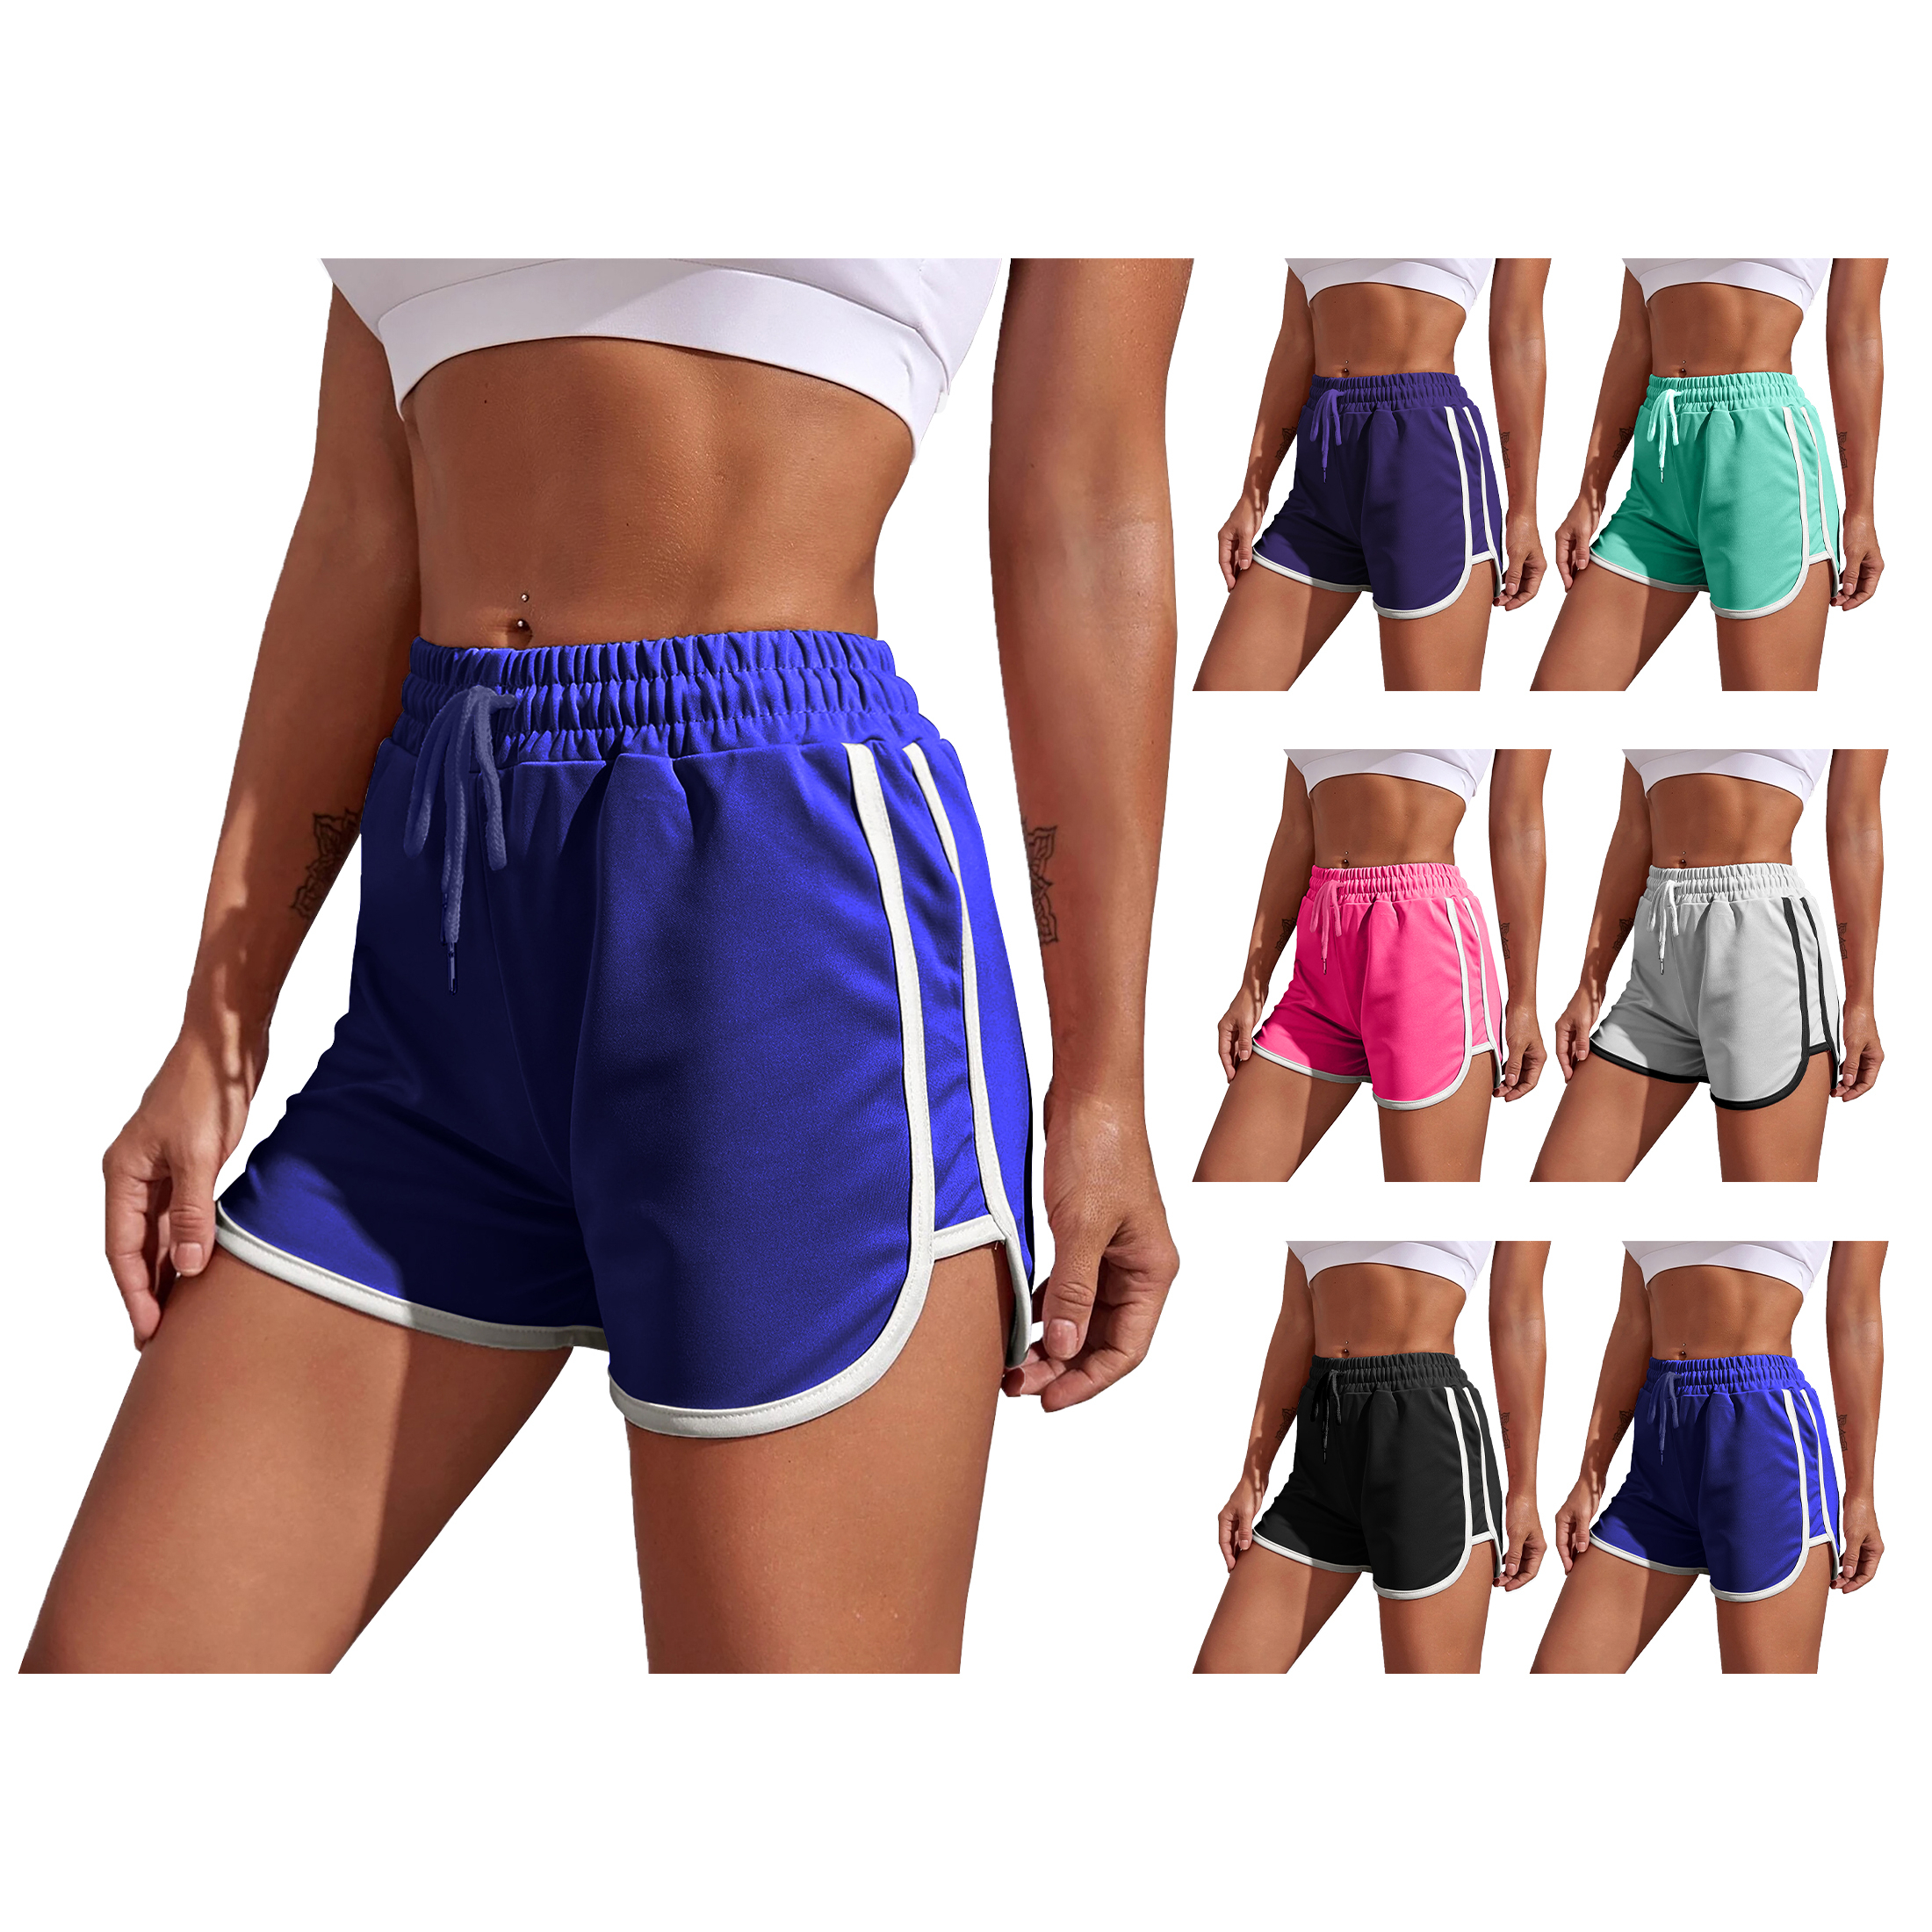 3-Pack Women's Dolphin Shorts Soft Comfy Elastic Waist Running Athletic Workout Yoga Pants - XL